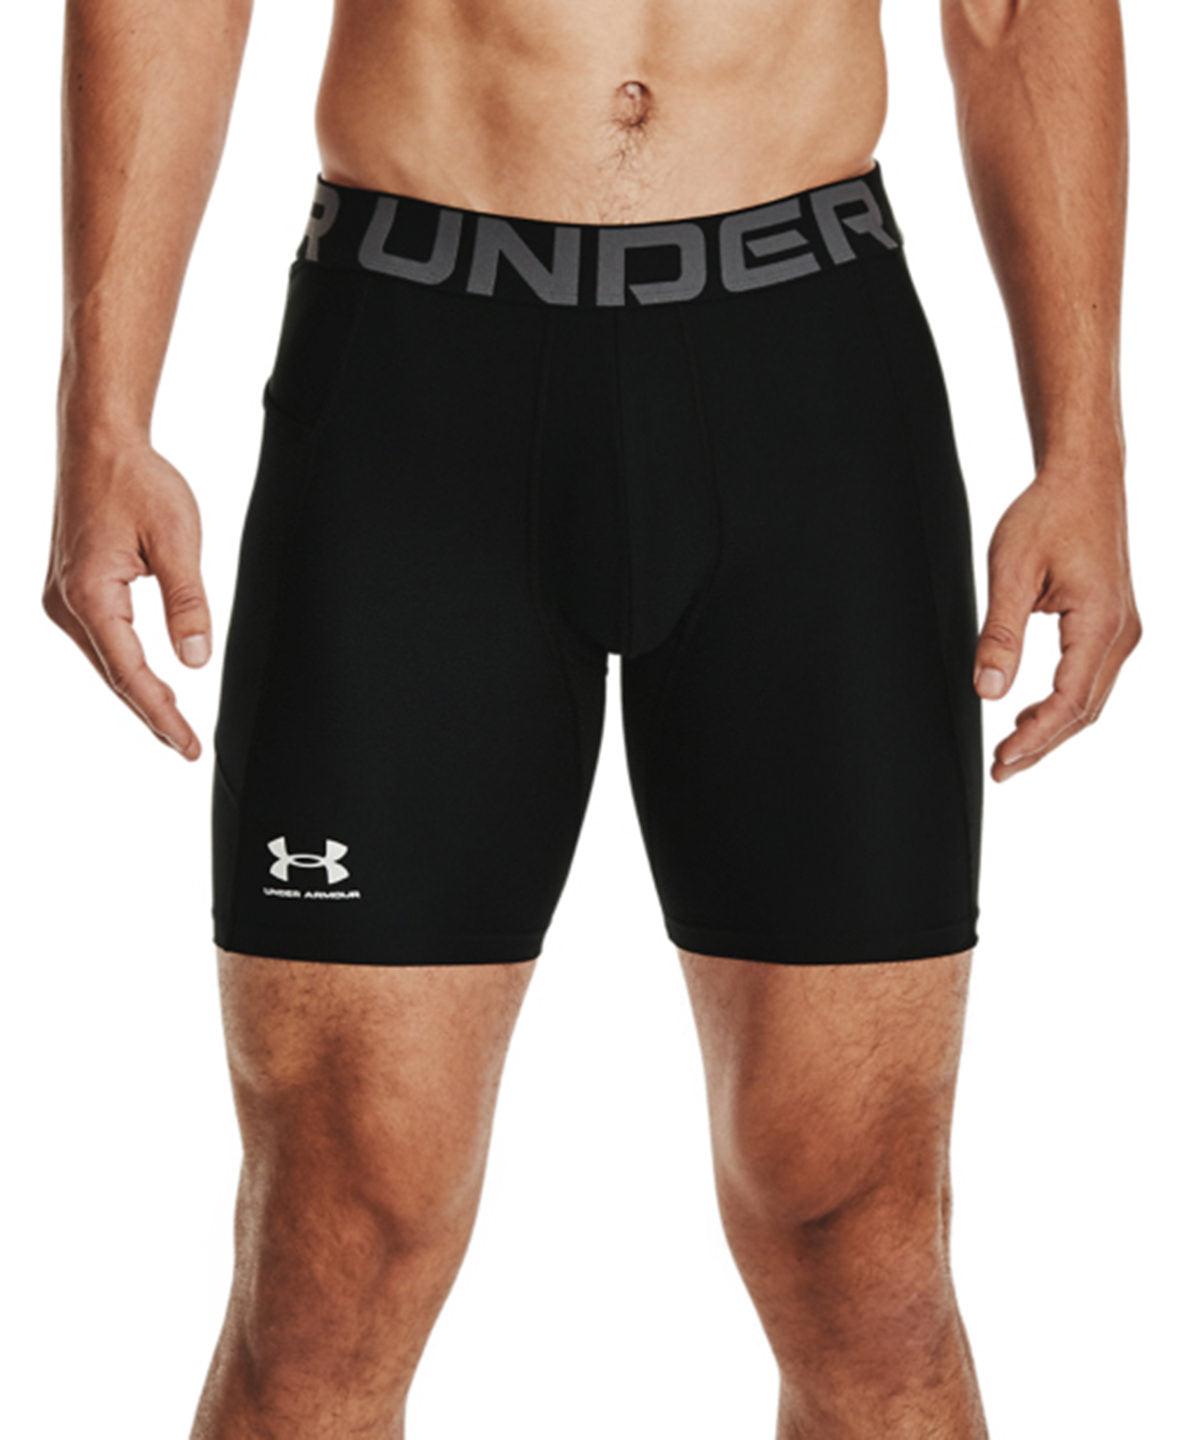 Black/White - UA HG armour shorts Shorts Under Armour Back to the Gym, Exclusives, Gymwear, New Styles For 2022, On-Trend Activewear, Trousers & Shorts Schoolwear Centres